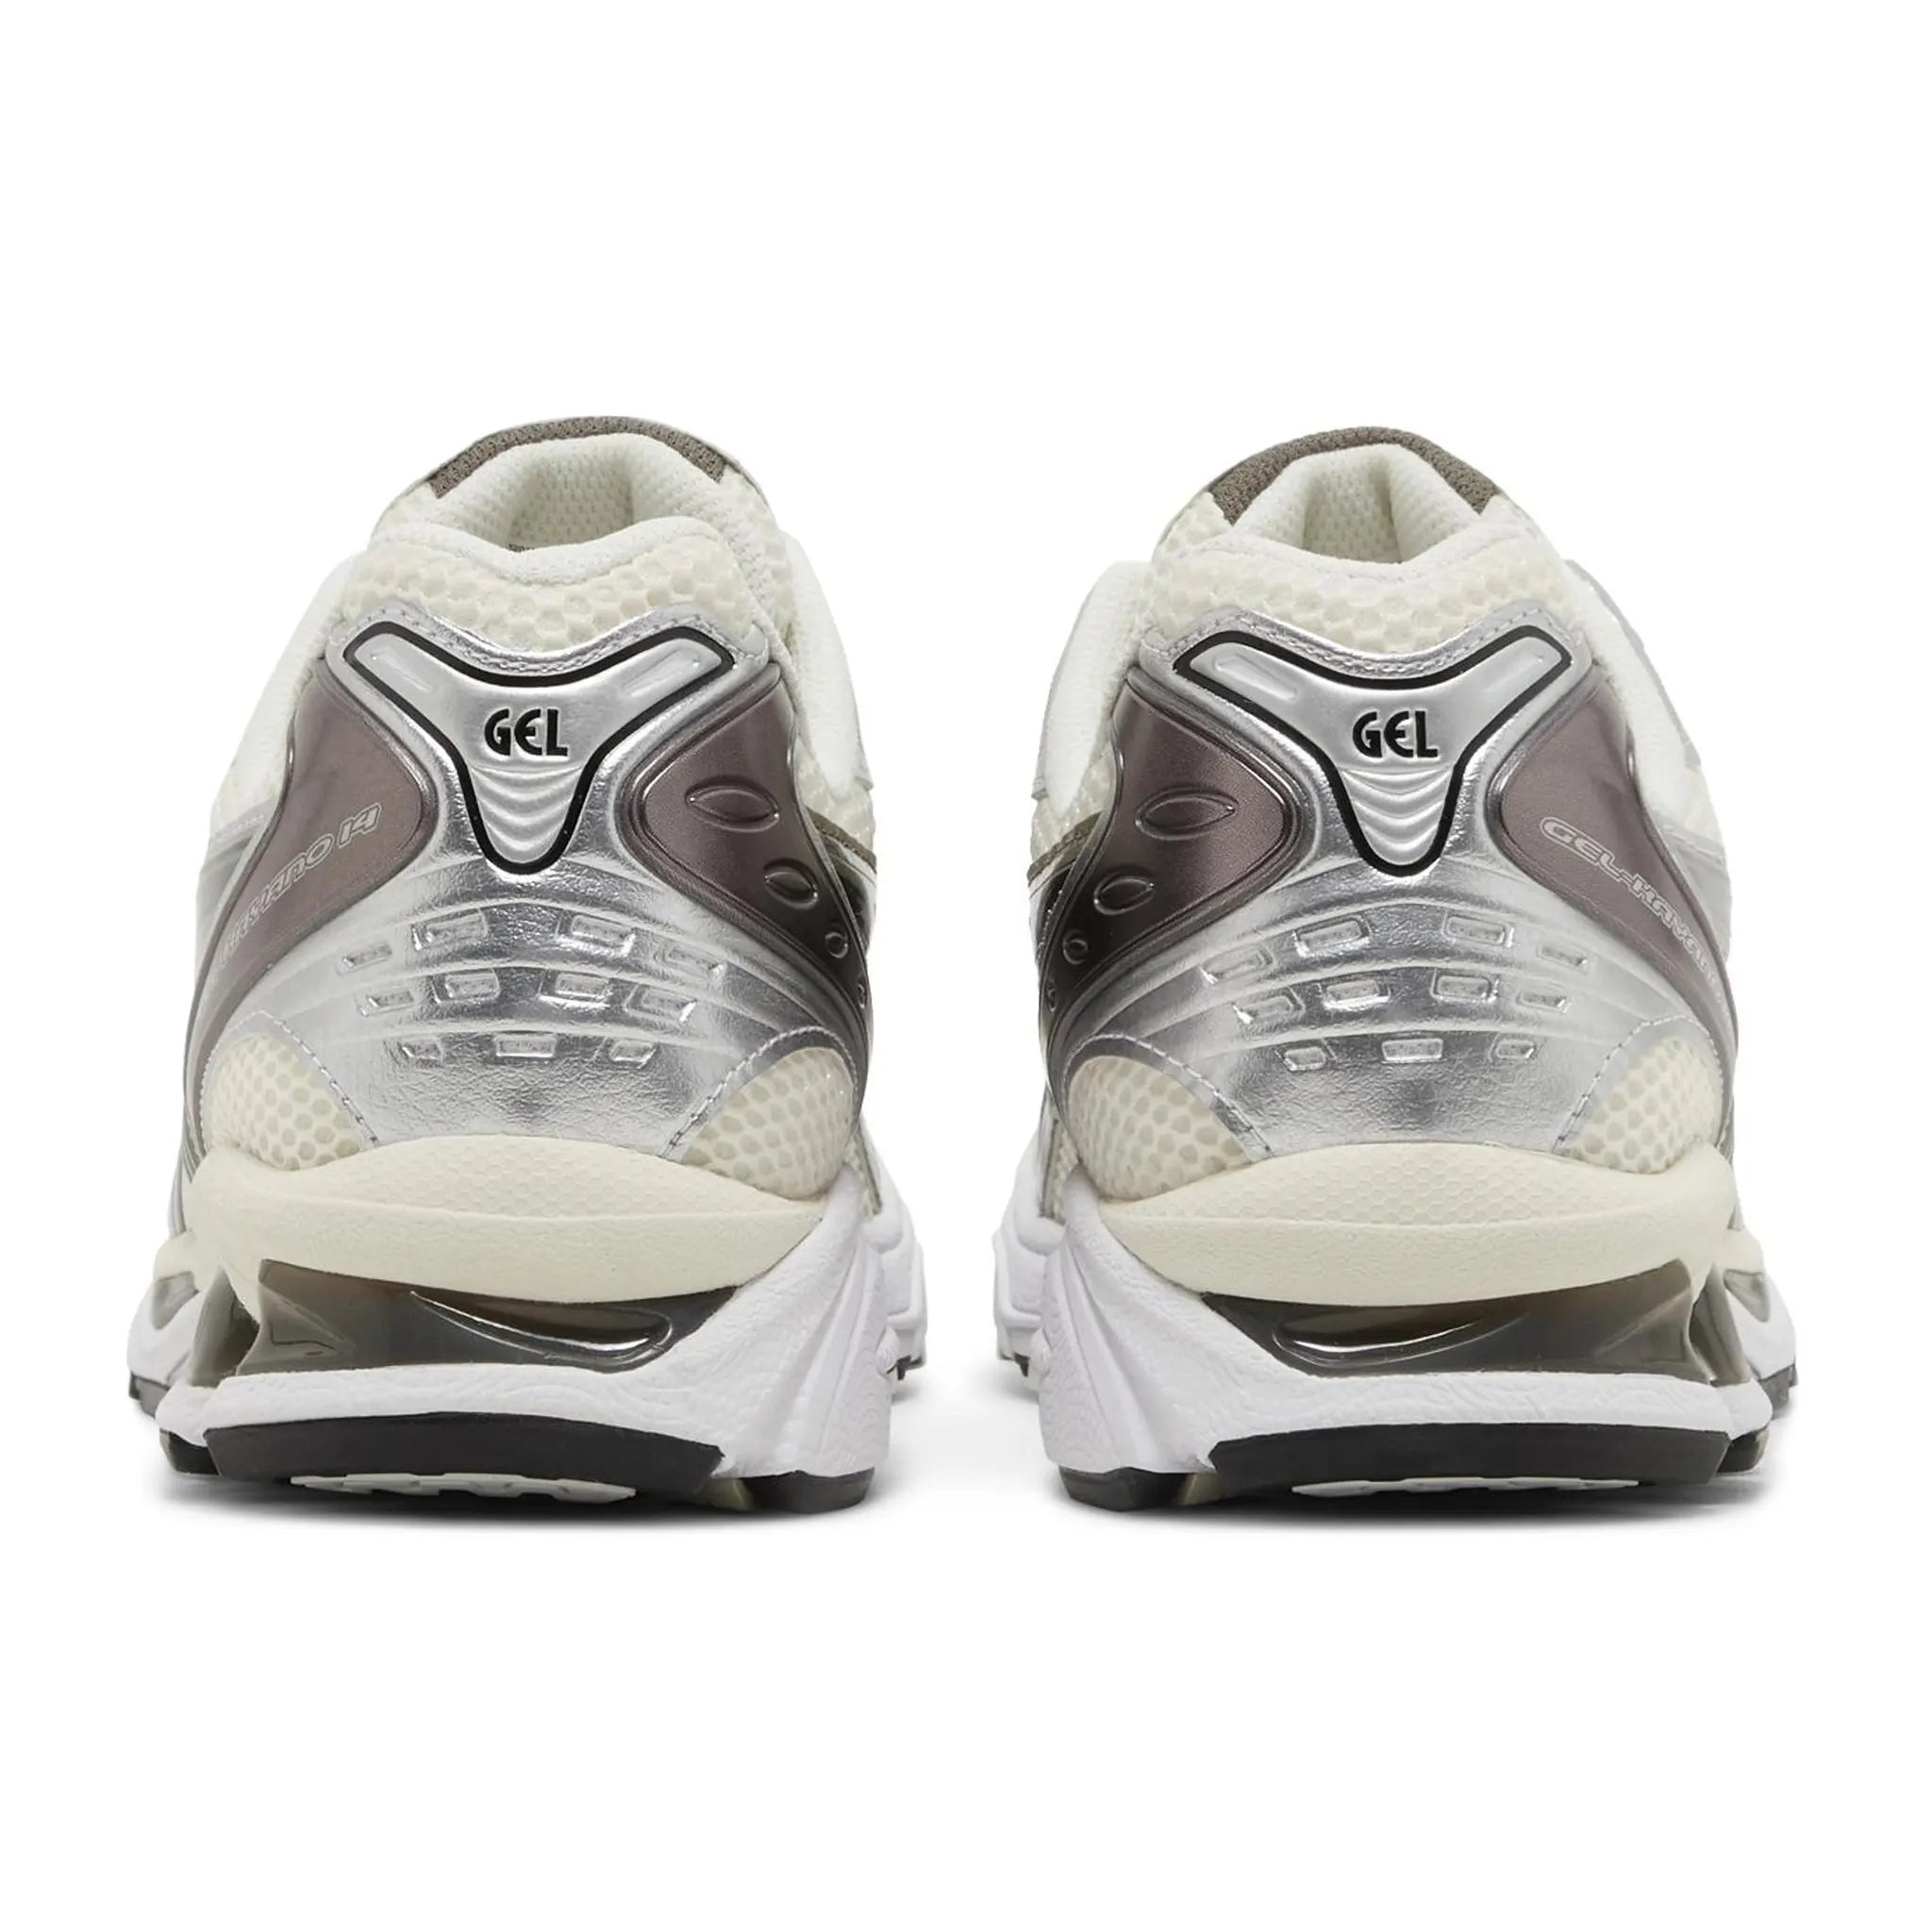 Back view of ASICS Gel-Kayano 14 Silver Cream 1201A019-108